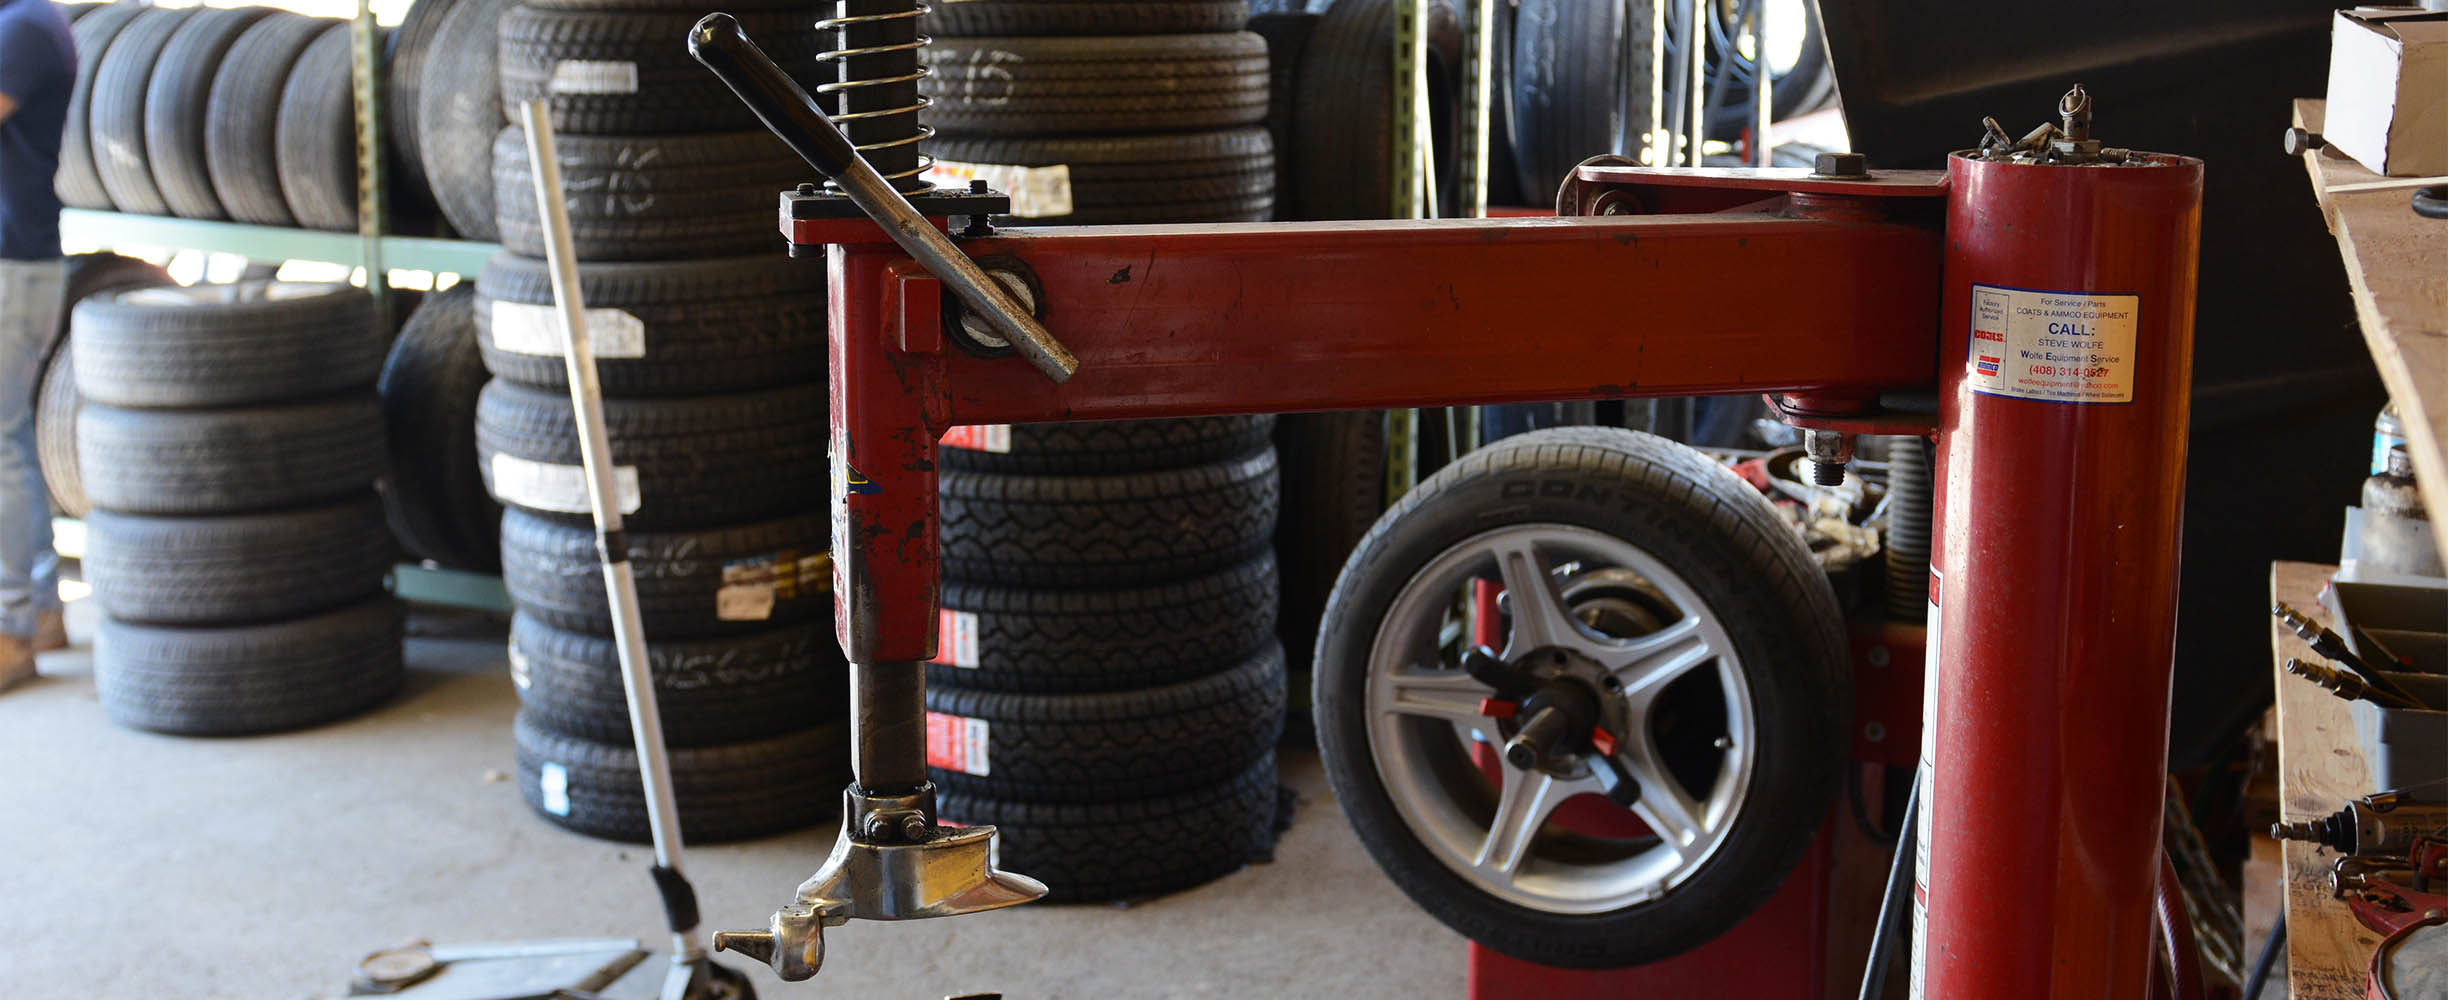 WE fixed puntured tires or replace your old tires with used or new ones, always installed after balancing.